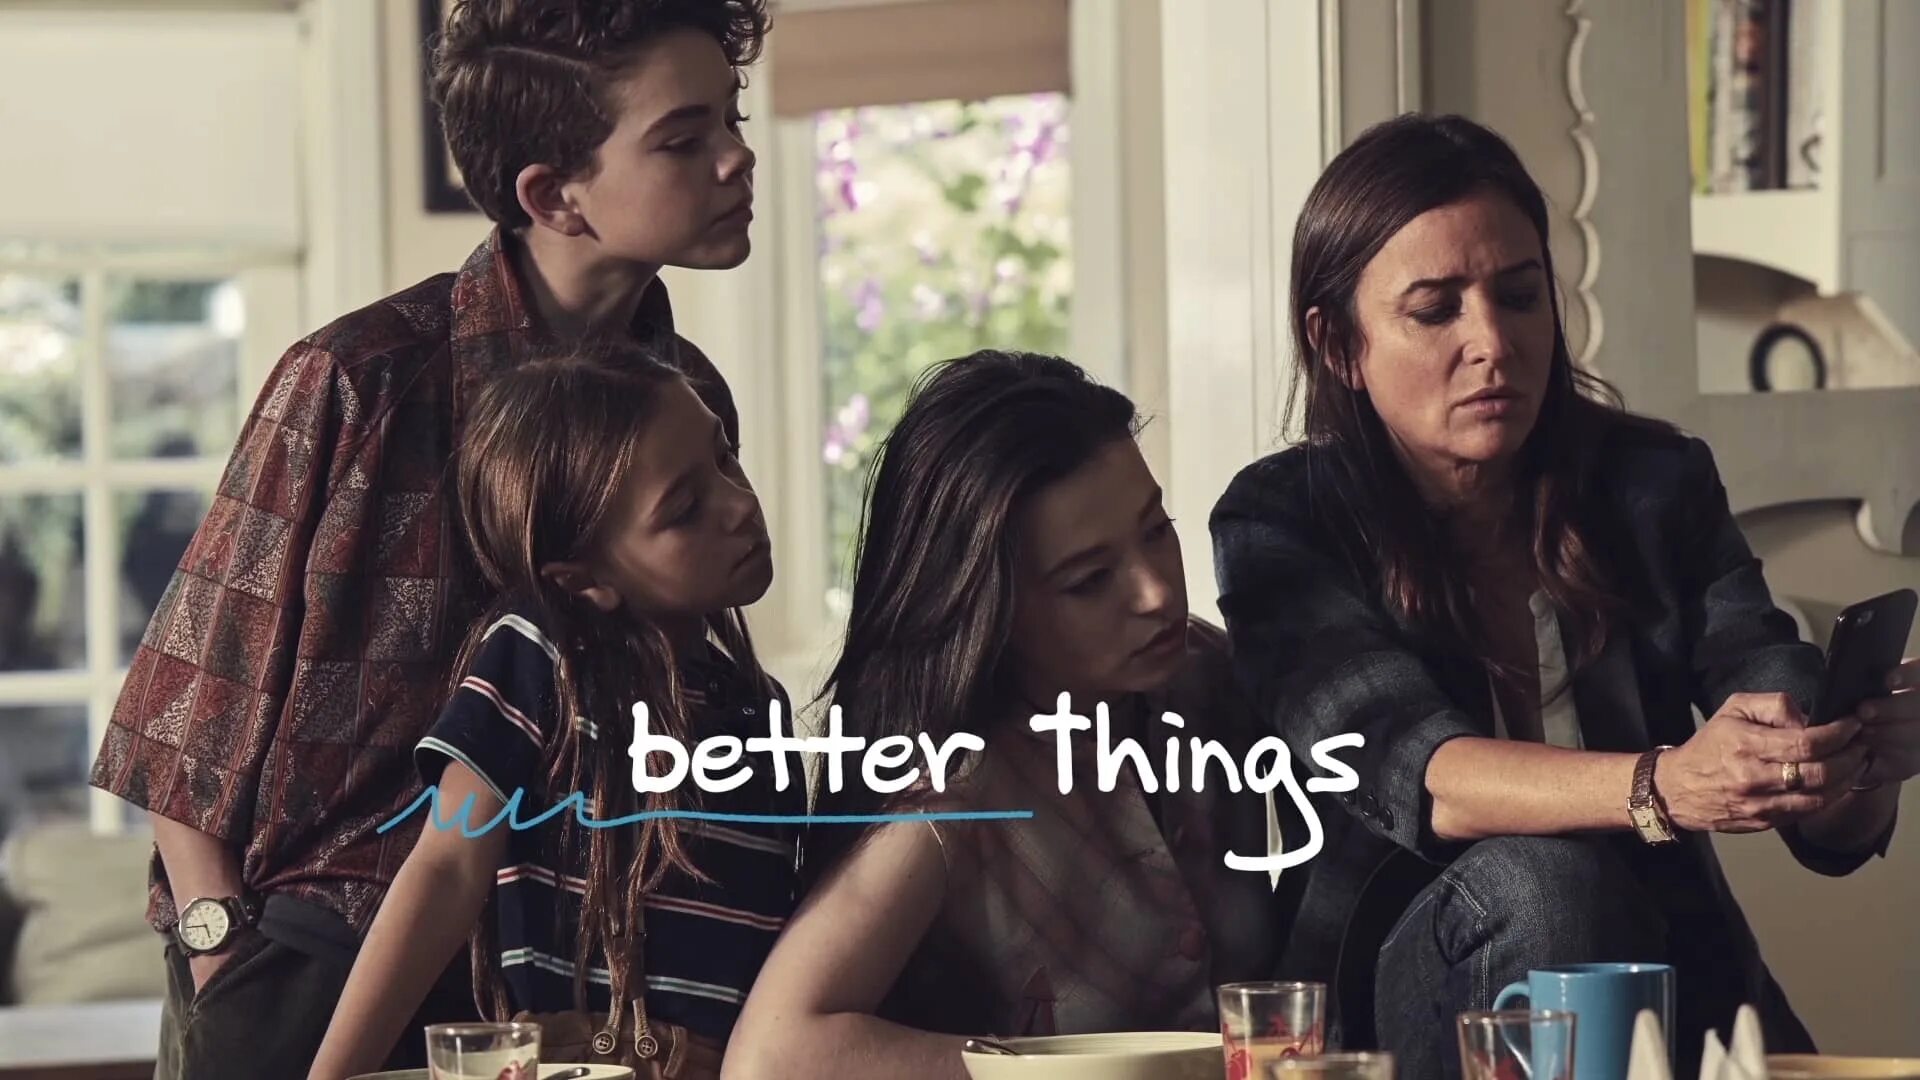 To find something better. Better things TV posters.